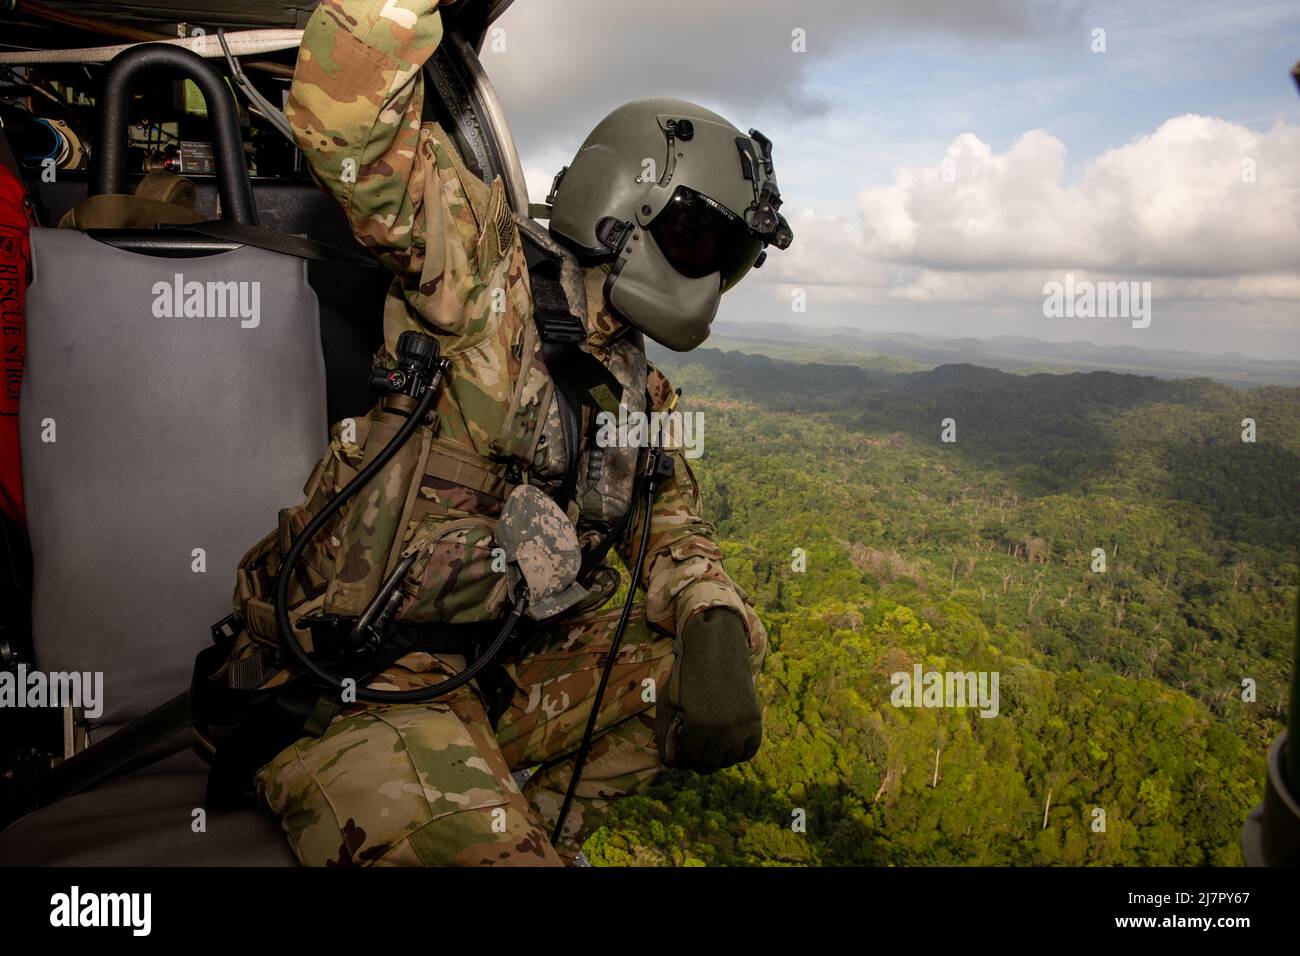 BELIZE CITY, Belize (May 9, 2022) U.S. Army Sgt. Matthew Lynch, a flight paramedic assigned 1st Battalion 228th Aviation Regiment, checks for airborne contacts during a medical evacuation exercise over Belize City, Belize during exercise Tradewinds 2022, May 9, 2022. Tradewinds 2022 is a multinational exercise designed to expand the Caribbean region’s capability to mitigate, plan for, and respond to crises; increase regional training capacity and interoperability; develop new and refine existing standard operating procedures (SOPs); enhance ability to defend exclusive economic zones (EEZ); and Stock Photo